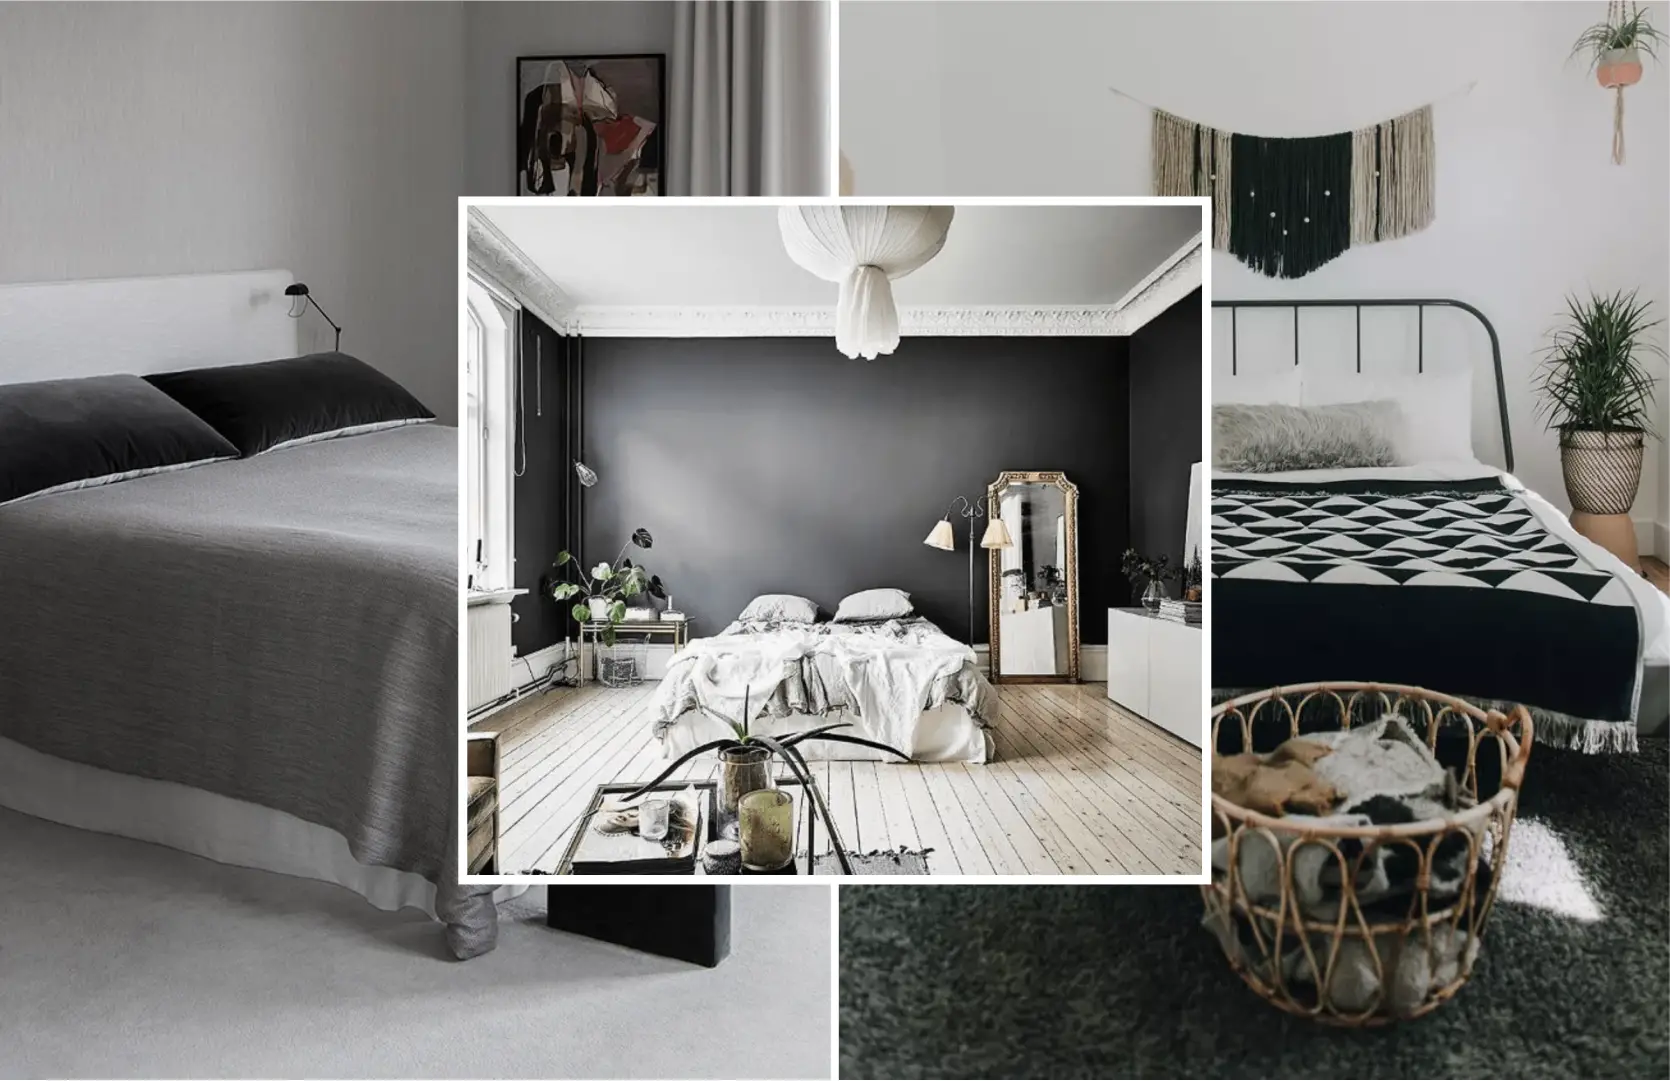 Go for Minimalist Style Touches to Your Bedroom